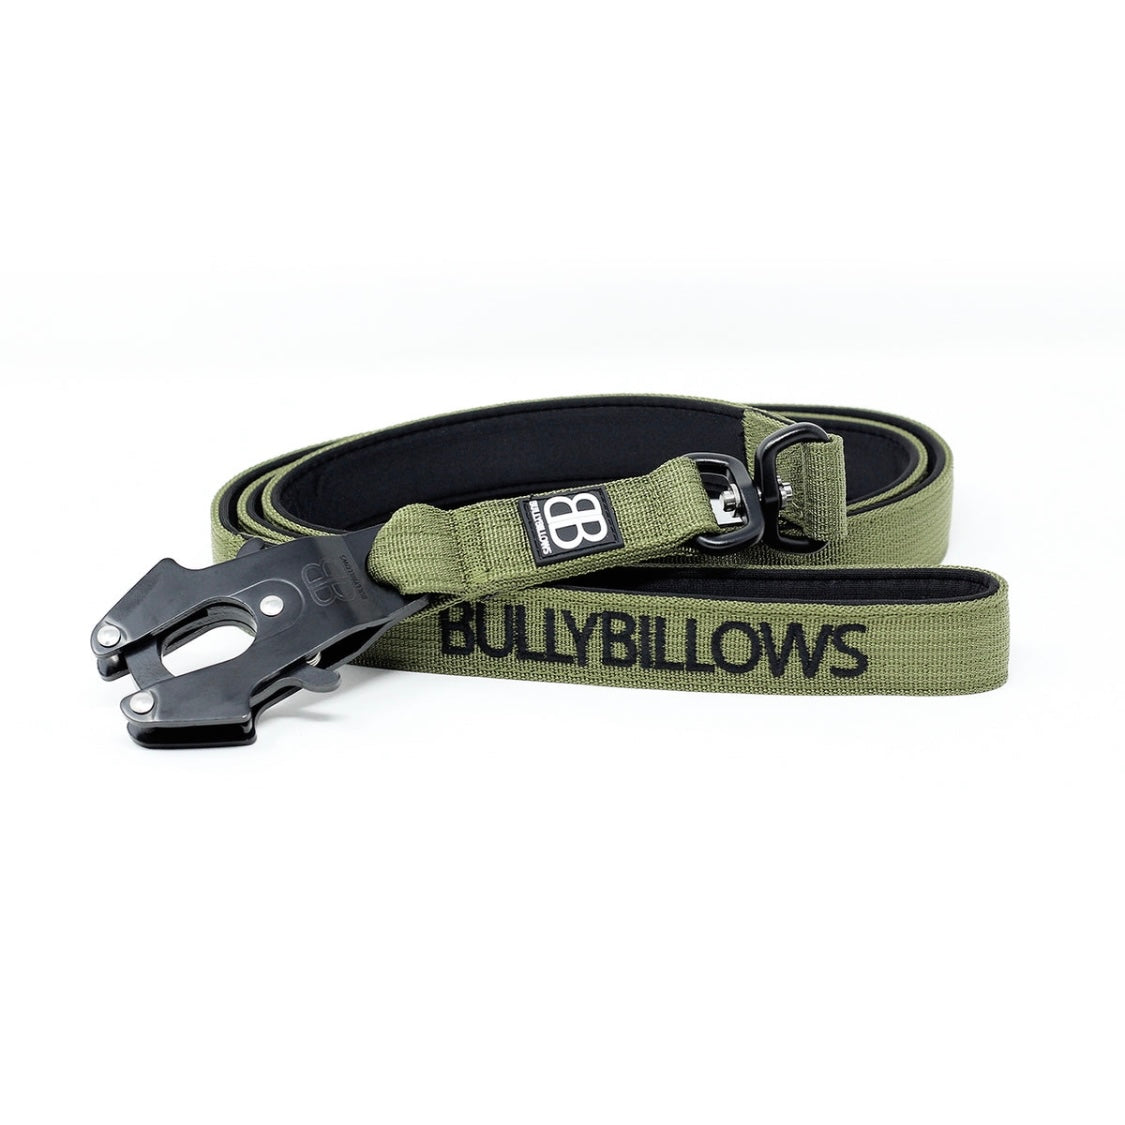 1.4m Swivel Combat Lead | Neoprene Lined, Secure Rated Clip with Soft Handle - Khaki